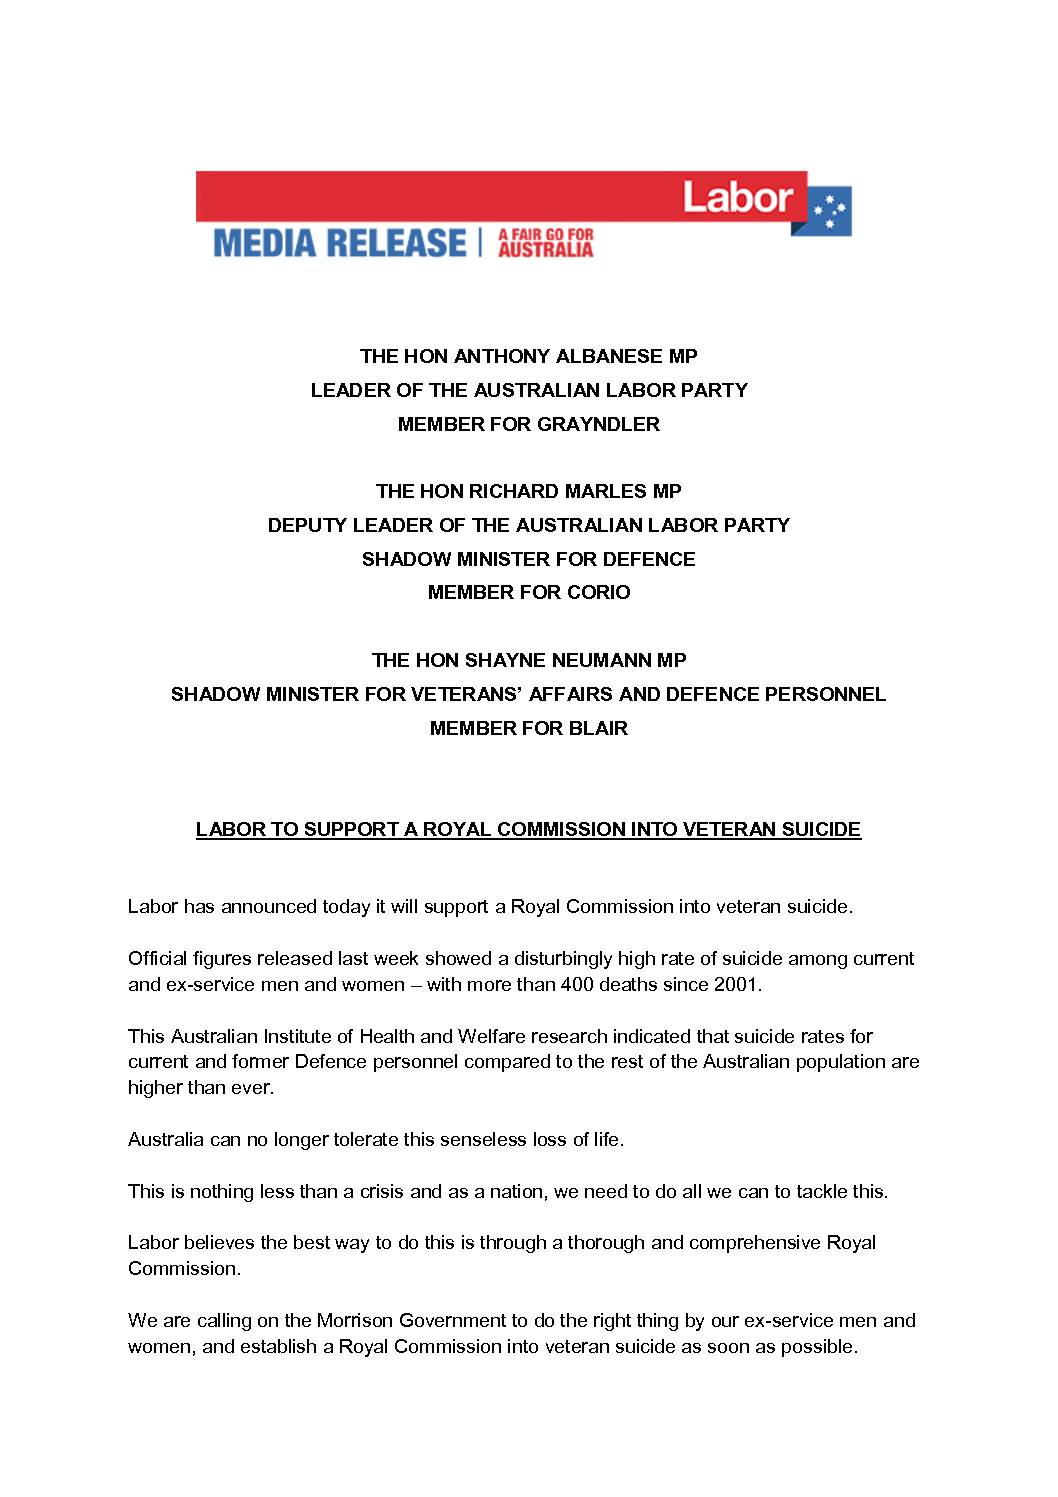 19.12.03 LABOR TO SUPPORT A ROYAL COMMISSION INTO VETERAN SUICIDE